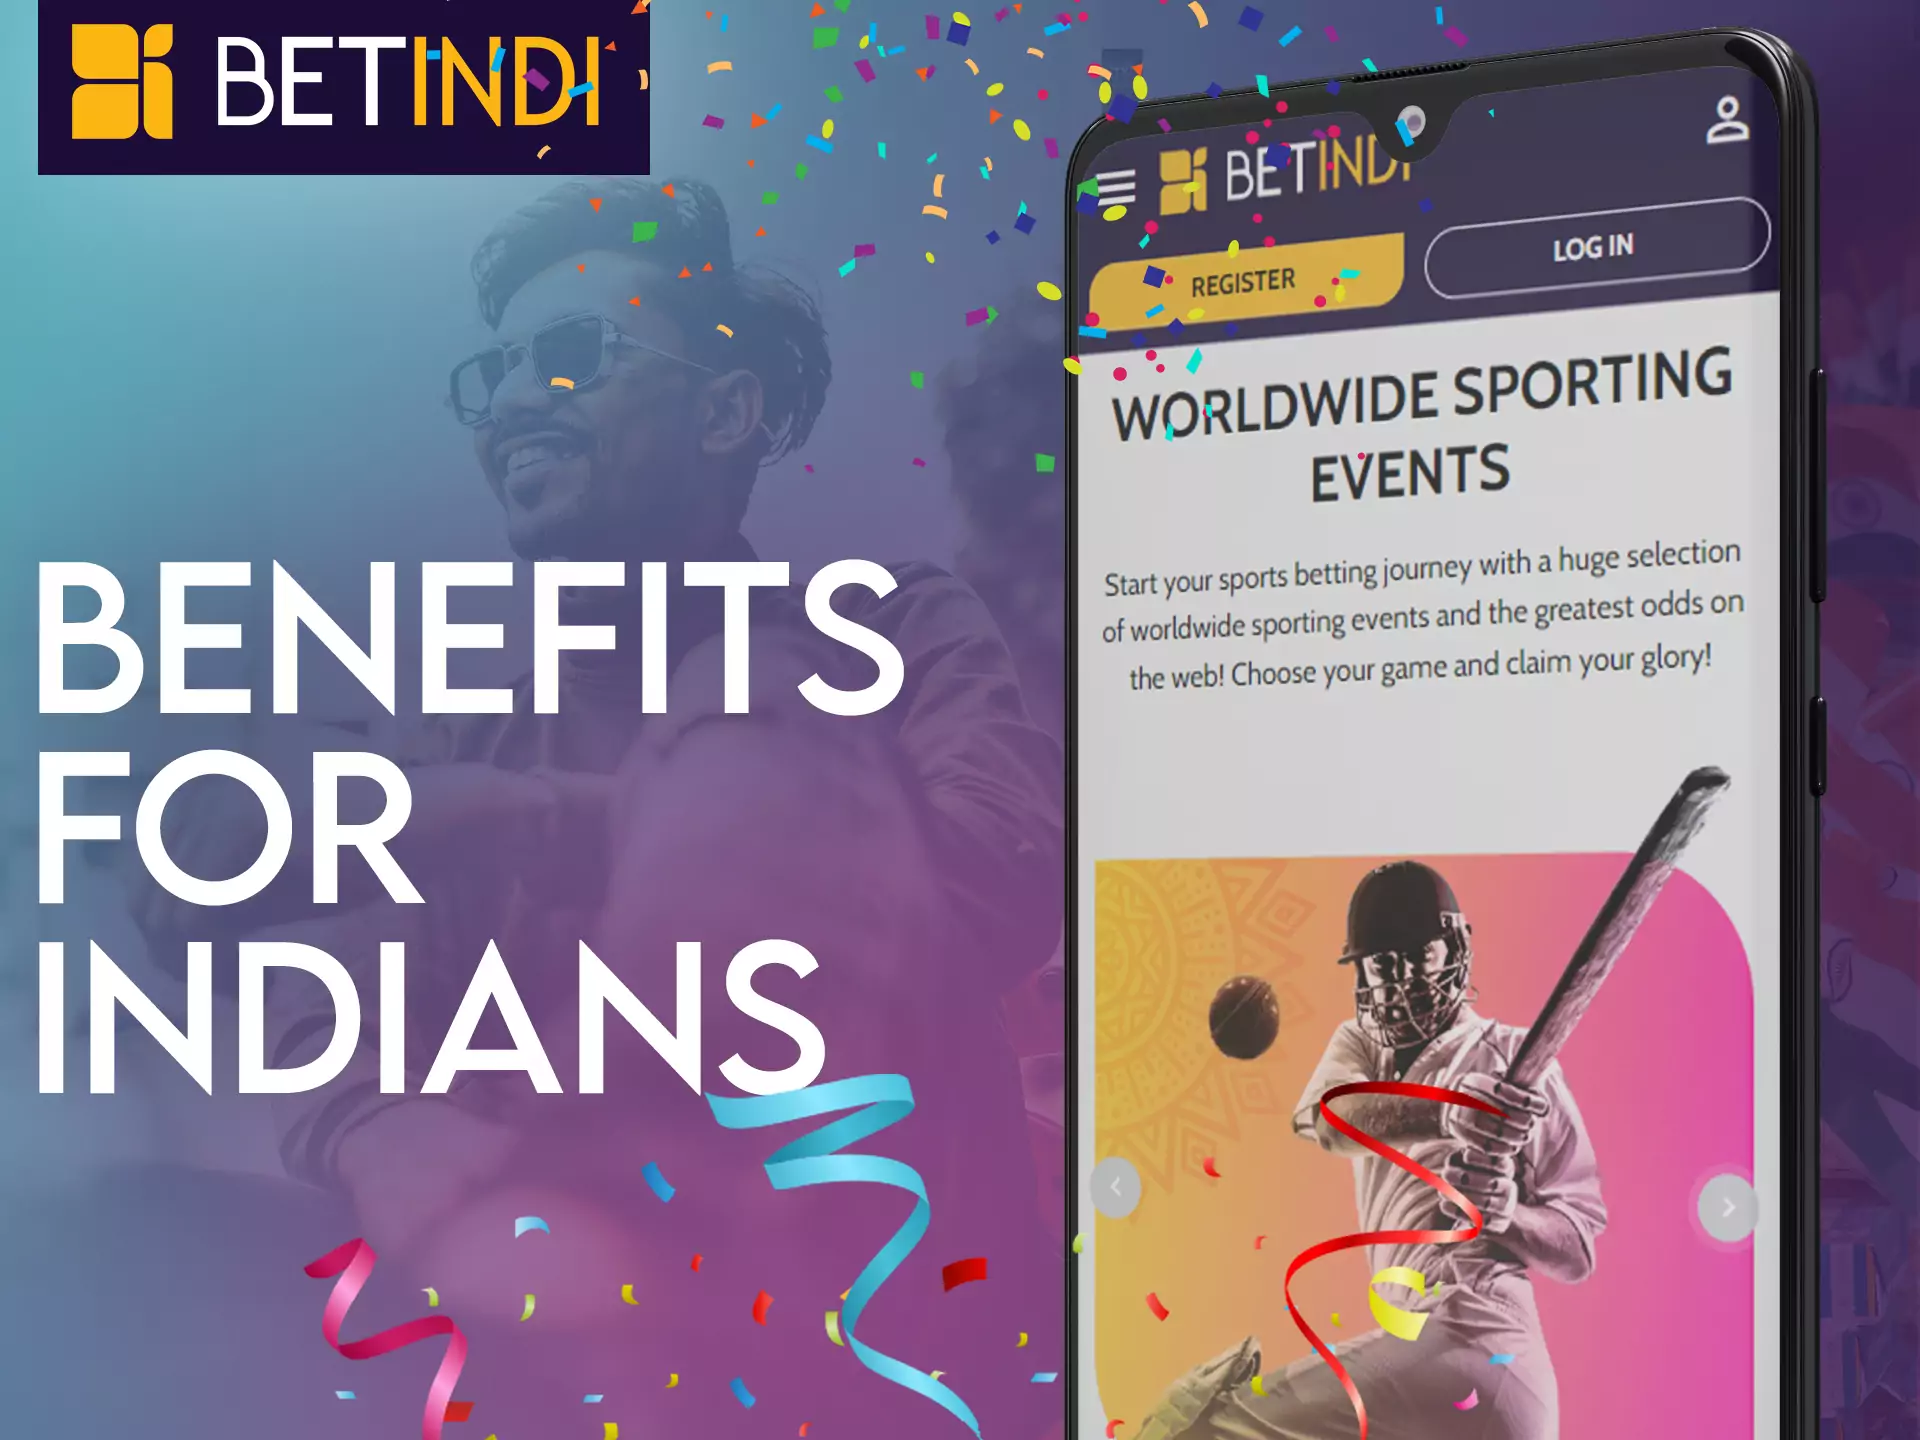 Betindi offers many advantages for players from India.